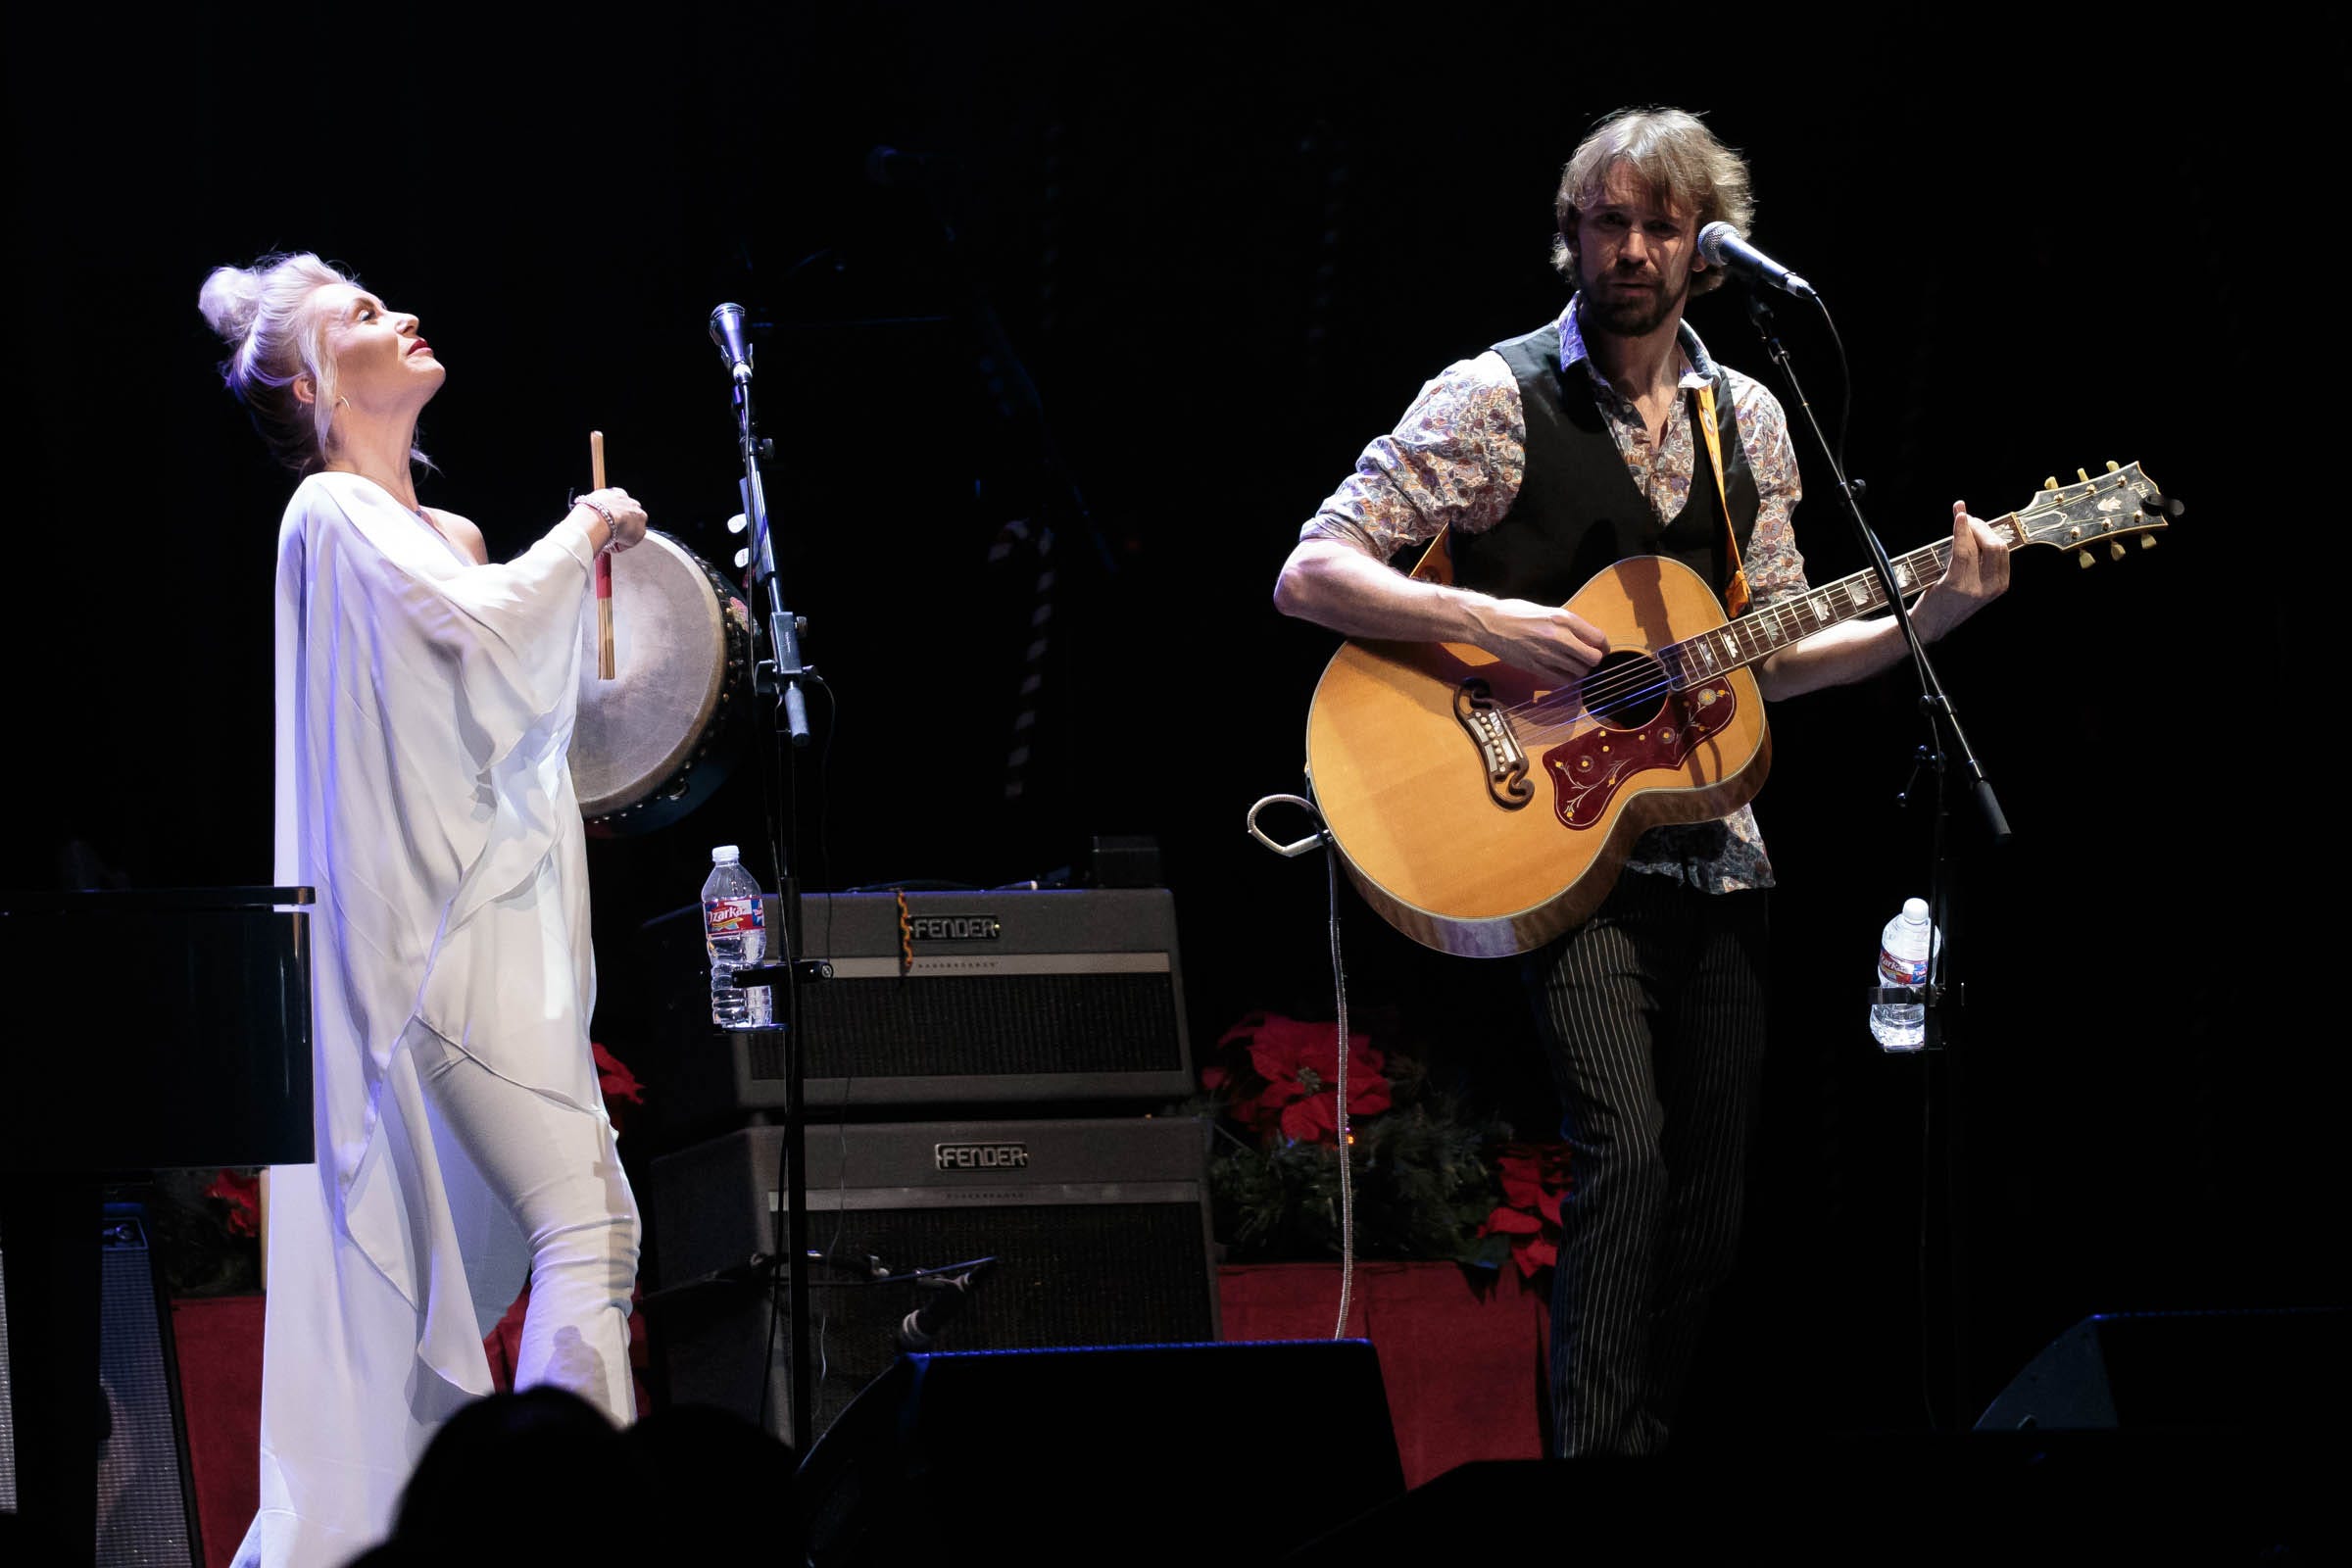 Andra Magee and Ben Jones of Beat Root Revival in December 2018 at ACL Live opening for Brian Wilson. The duo moved from the British Isles to Austin eight years ago.